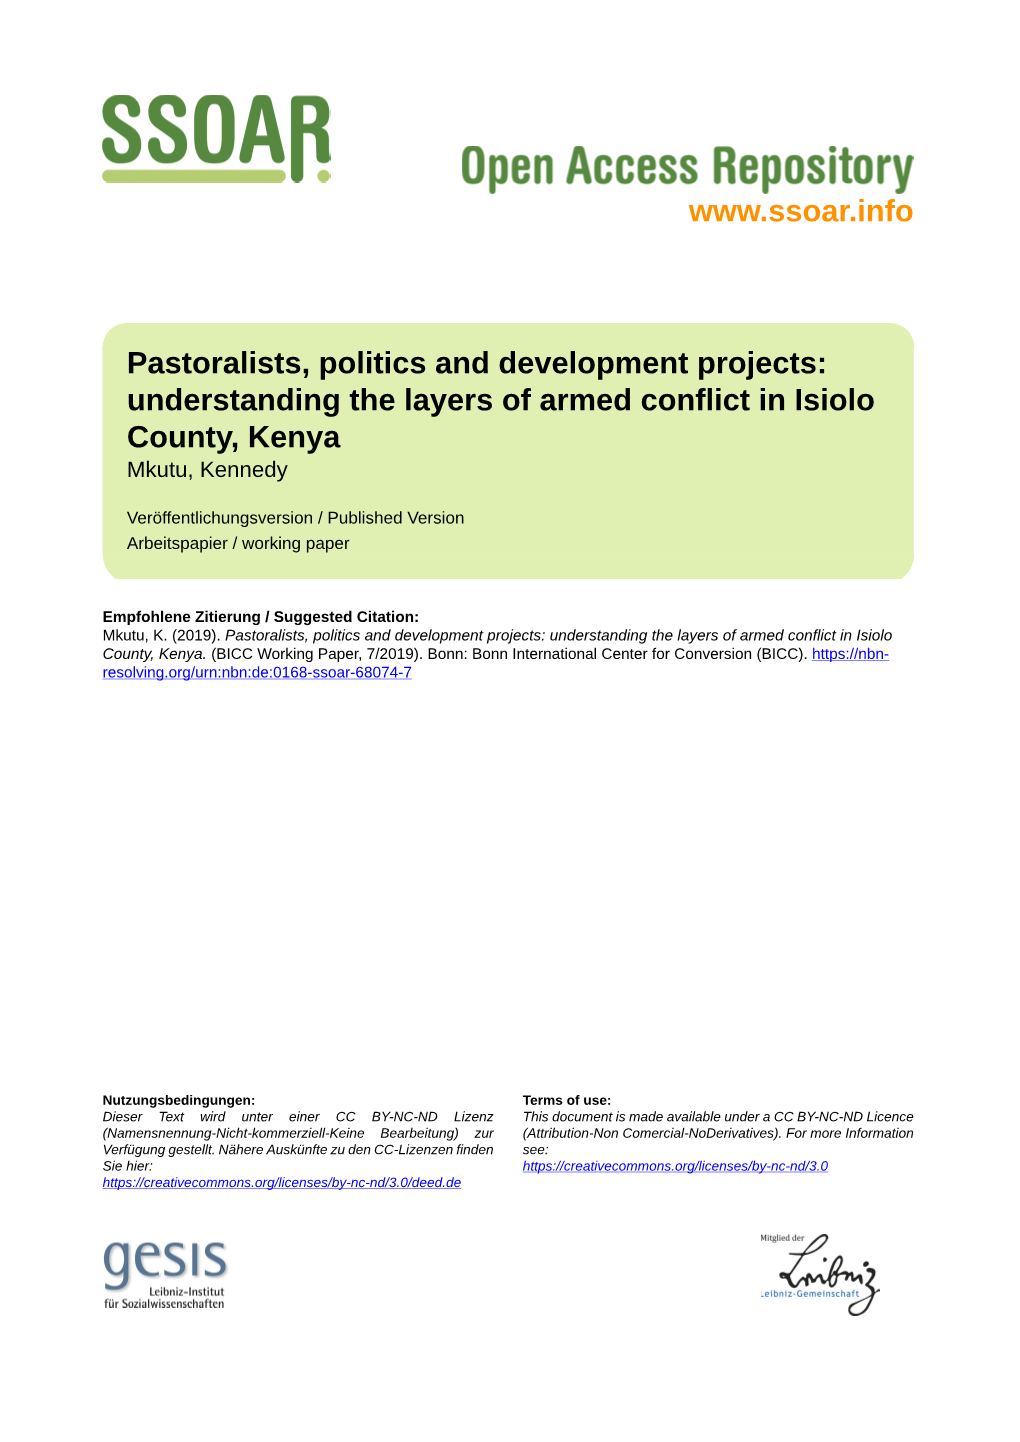 Pastoralists, Politics and Development Projects: Understanding the Layers of Armed Conflict in Isiolo County, Kenya Mkutu, Kennedy